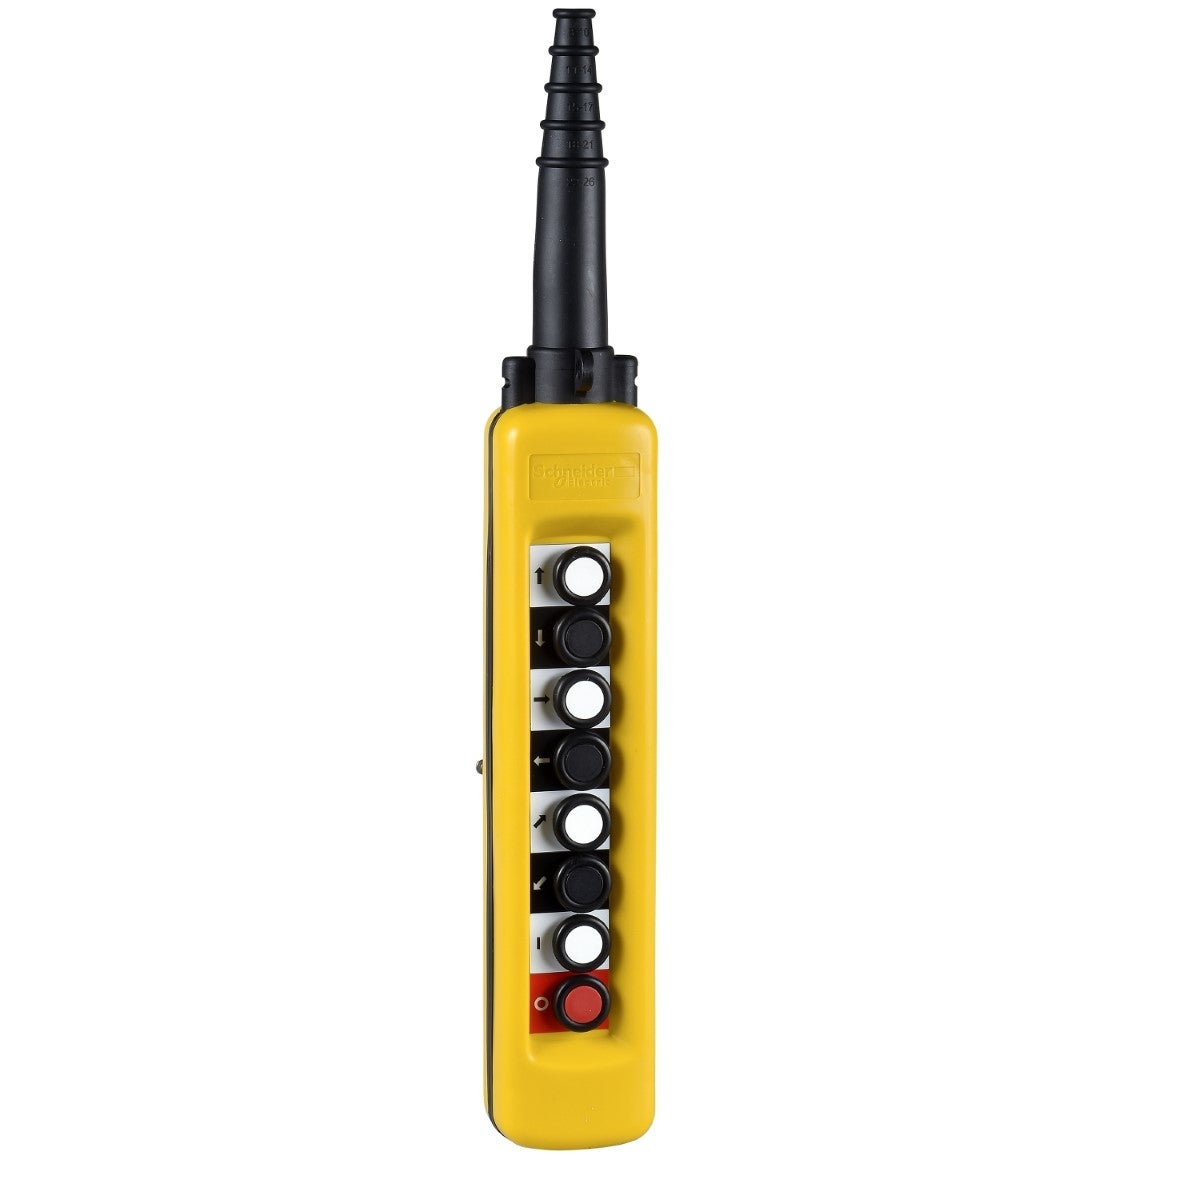 Pendant control station, Harmony XAC, plastic, yellow, 8 push buttons with NO+NC